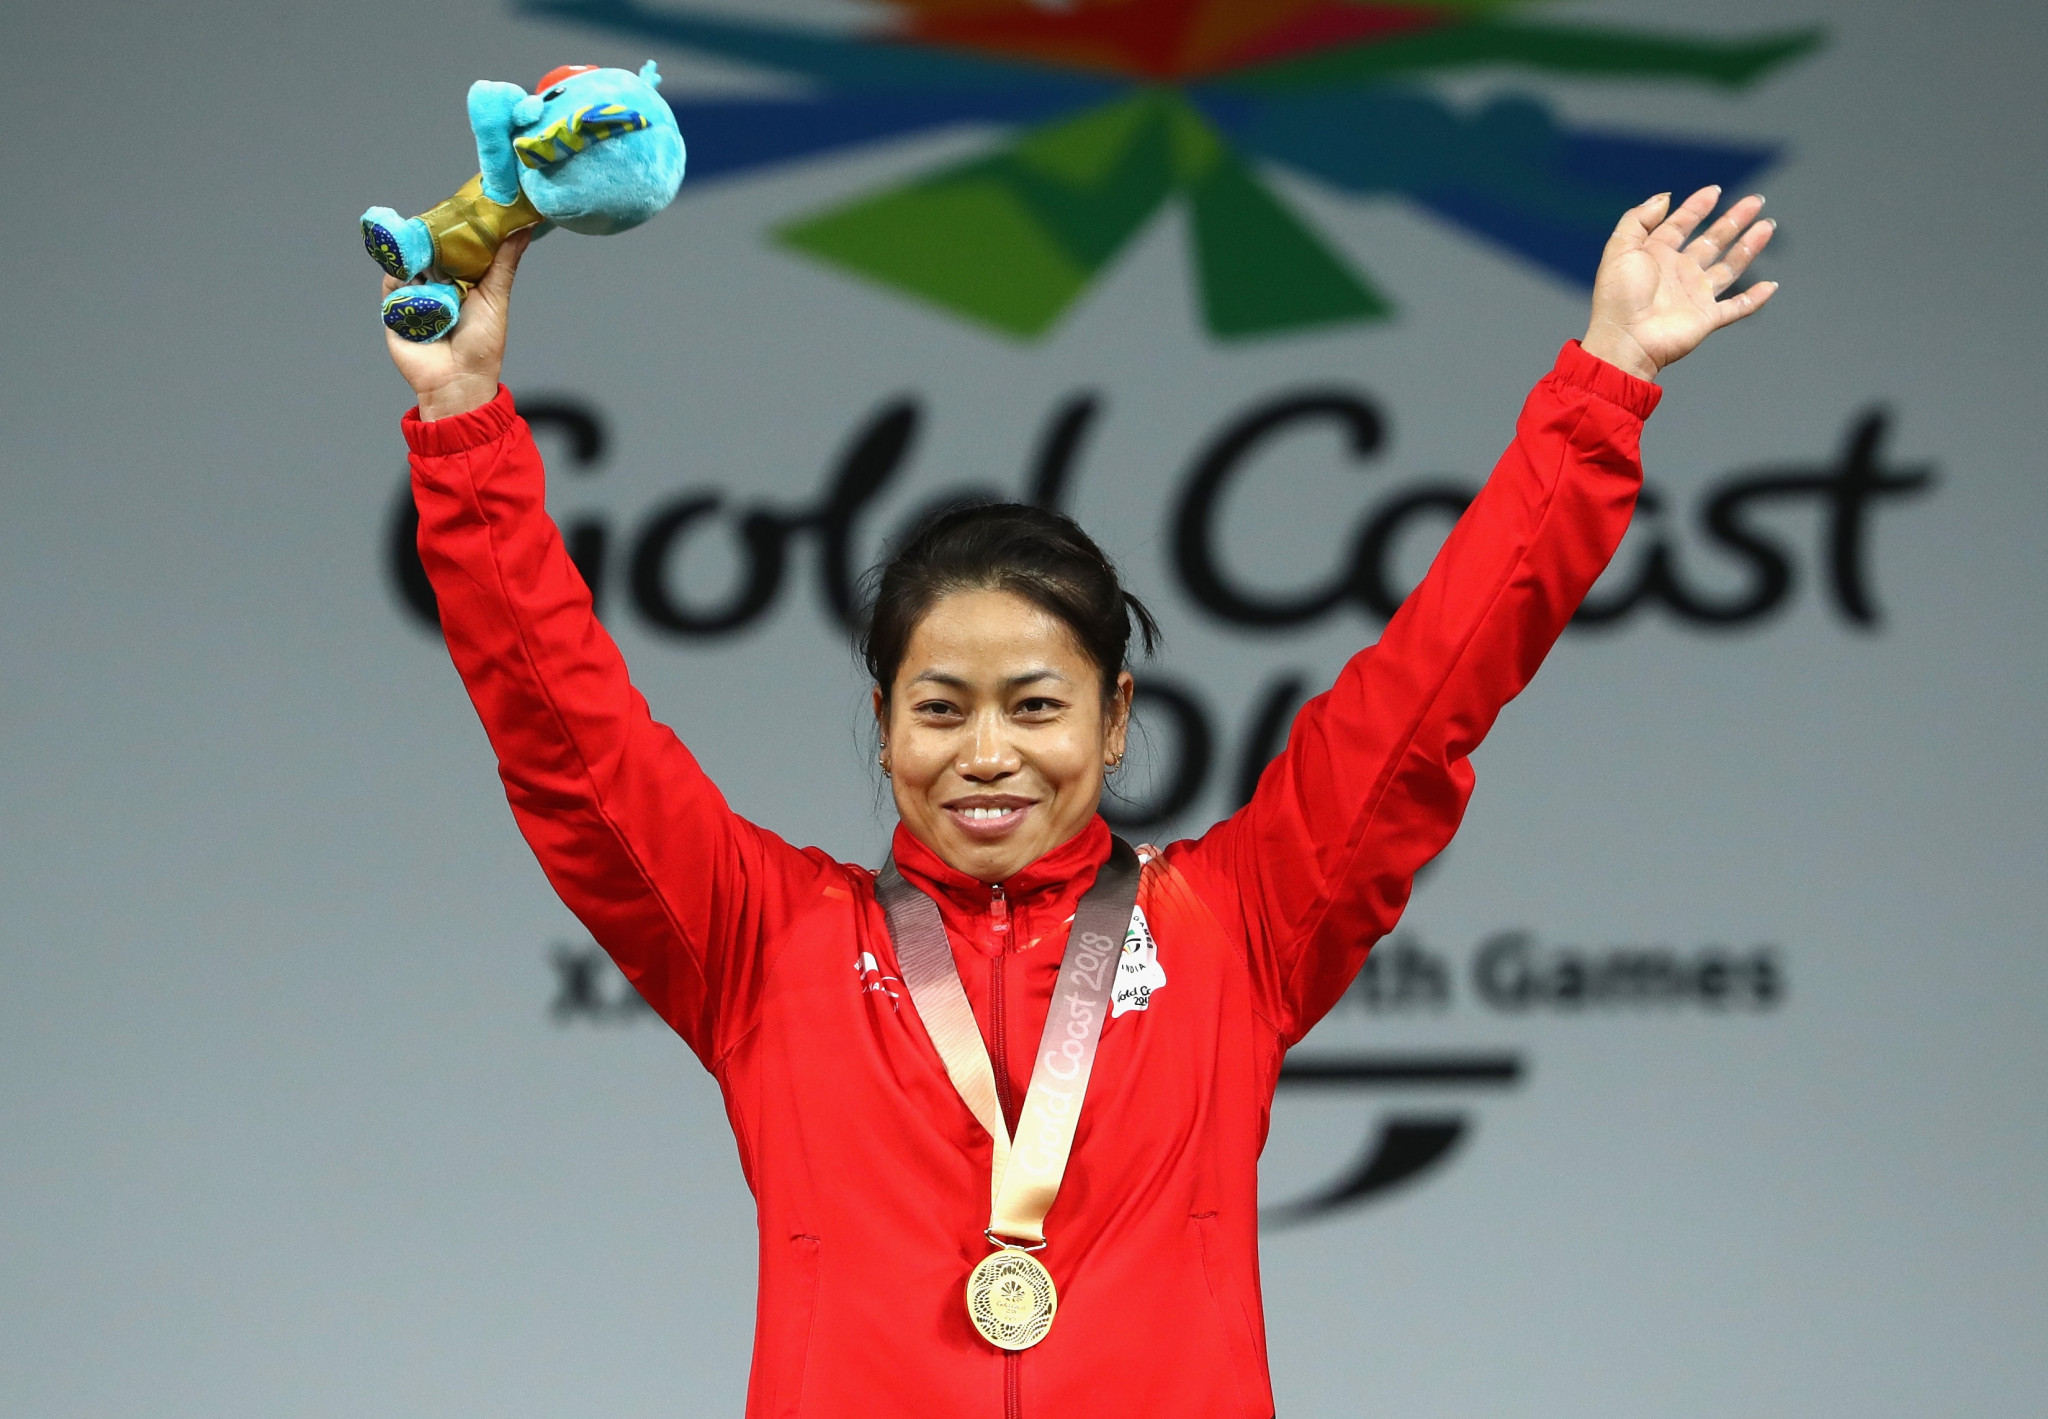 Double Commonwealth Games champion Sanjita Chanu has been provisionally suspended after traces of drostanolone were found in a urine sample taken during India's National Championships ©Getty Images  